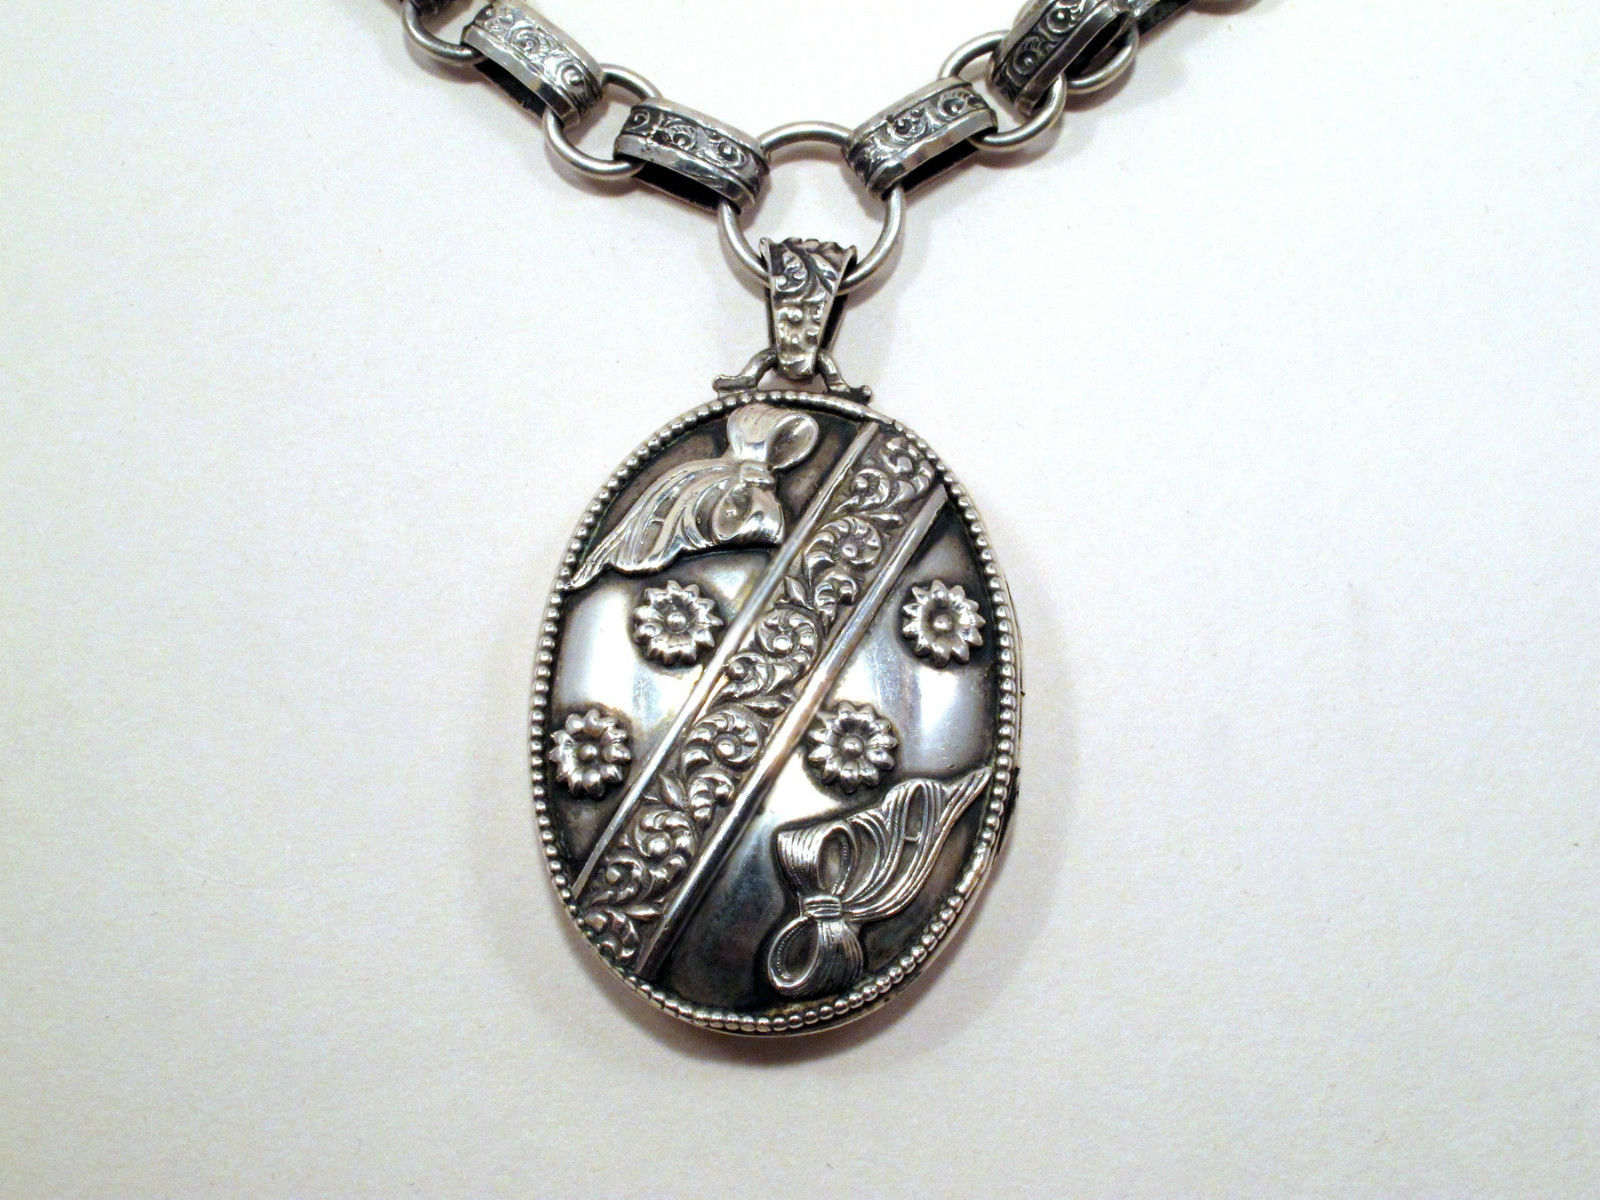 Victorian Era Antique Stering Silver Locket and Chain Set